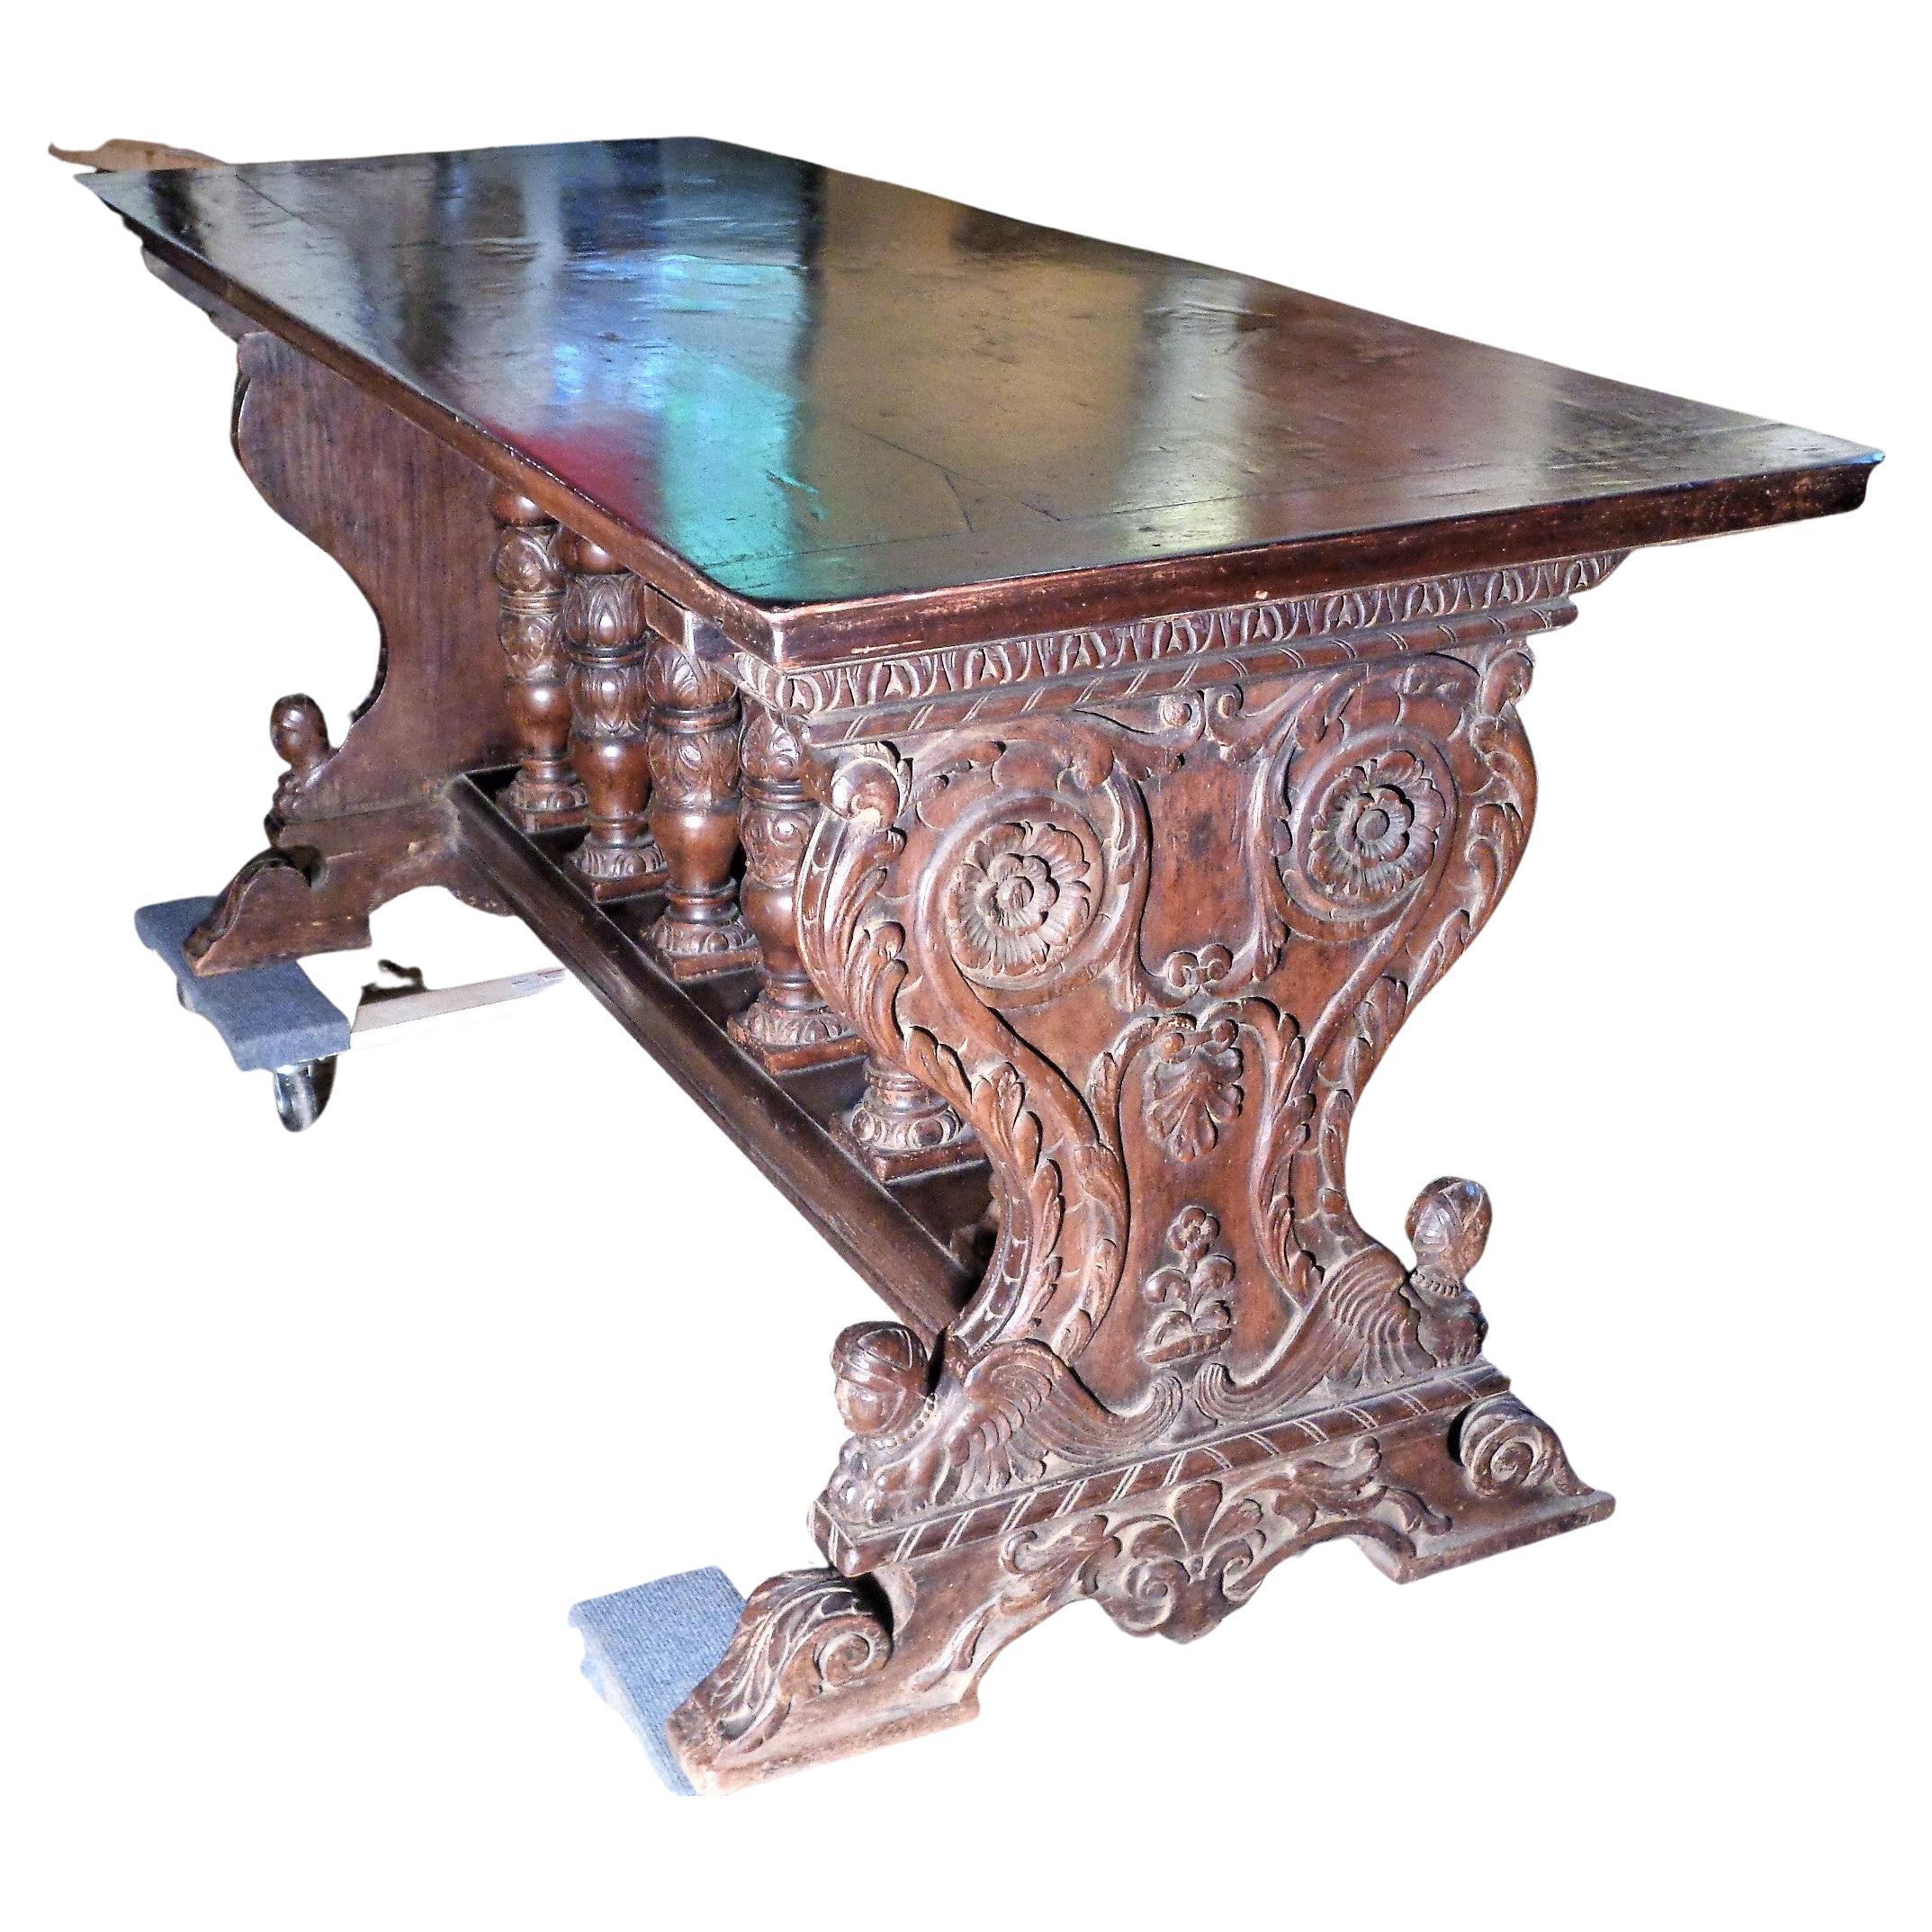 Italian Renaissance style carved walnut library table ( hall table, console table, refectory type table ) w/ thick wide two board top in beautifully aged original rich surface color. Measures 78